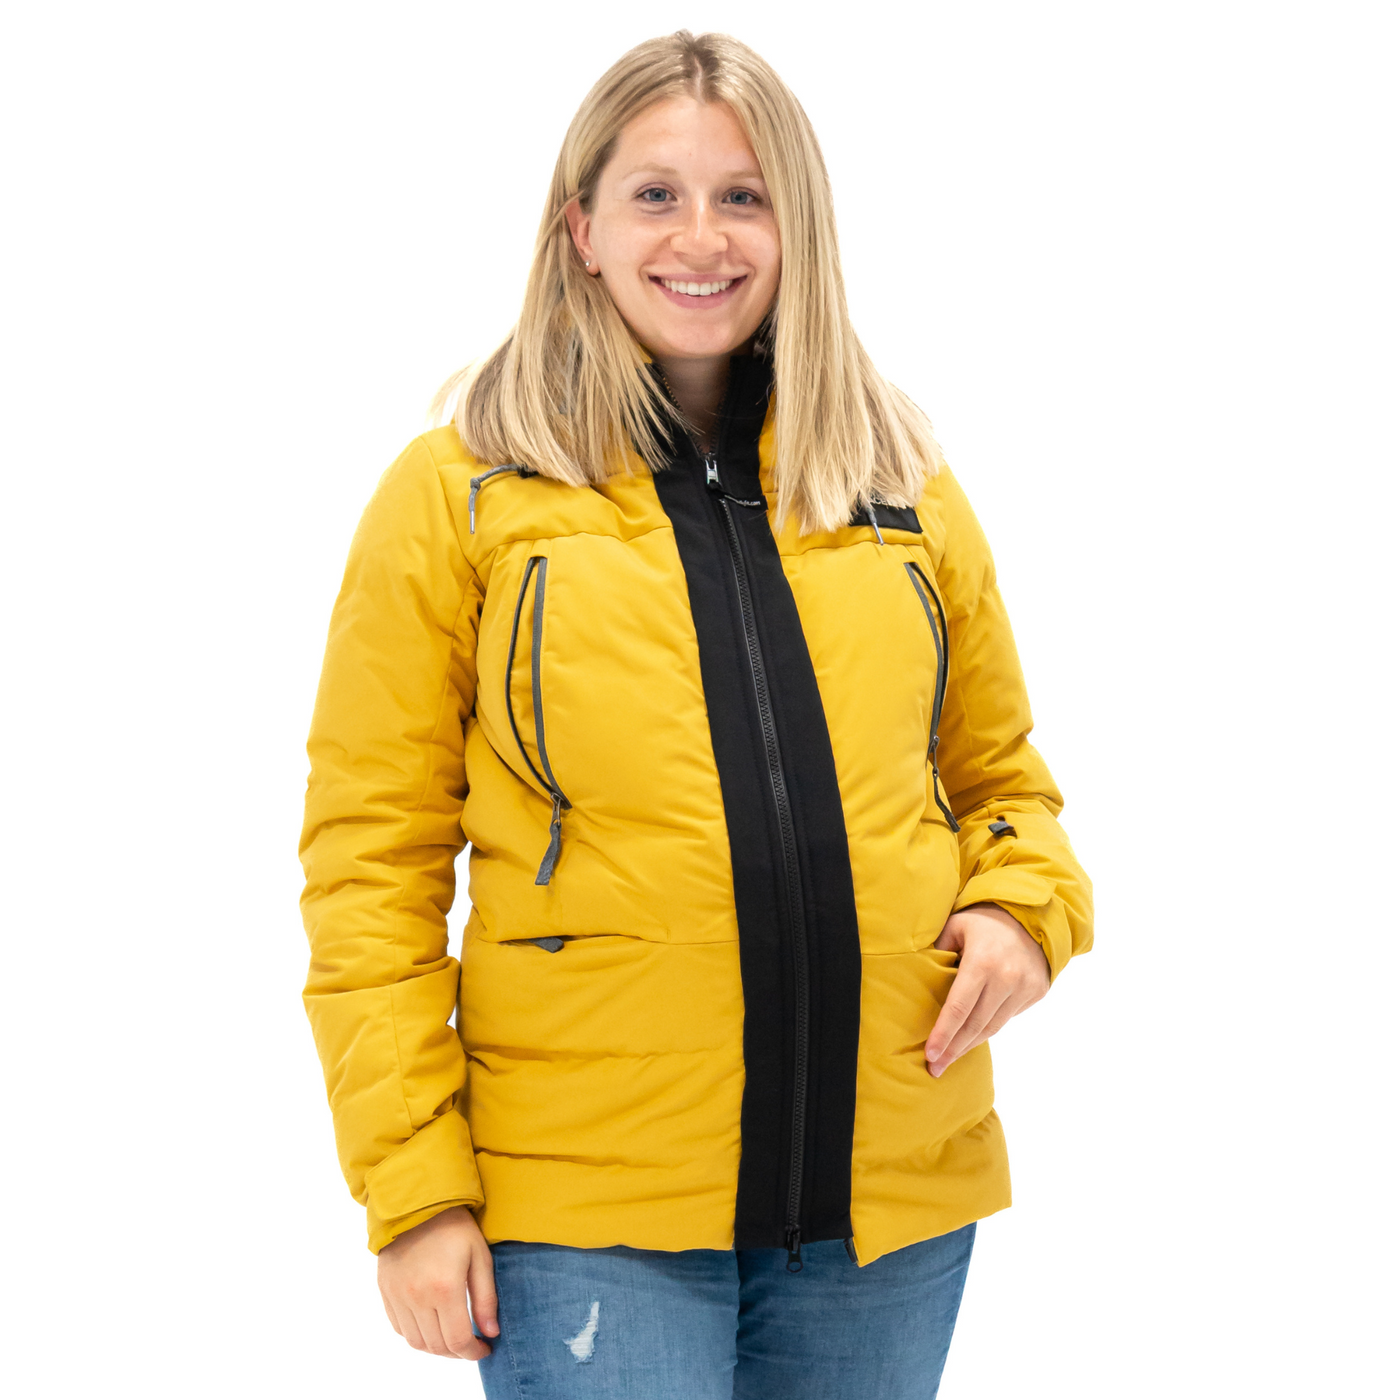 Convert your OWN jacket into a maternity coat / jacket